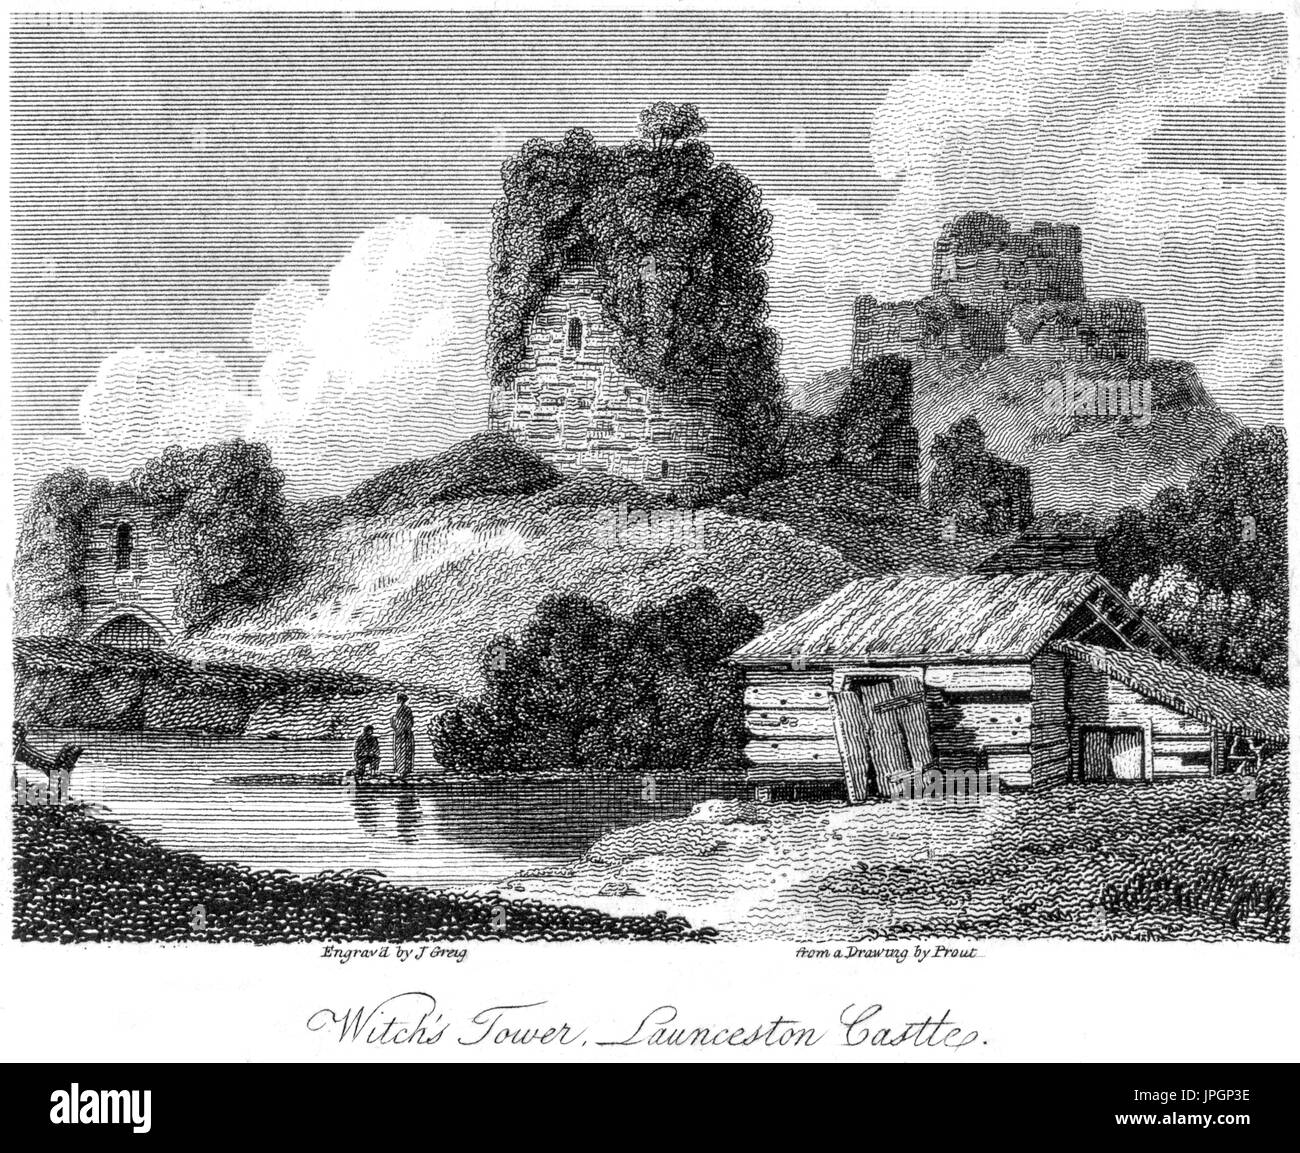 An engraving of the Witch's Tower, Launceston Castle scanned at high resolution from a book printed in 1808. Believed copyright free. Stock Photo